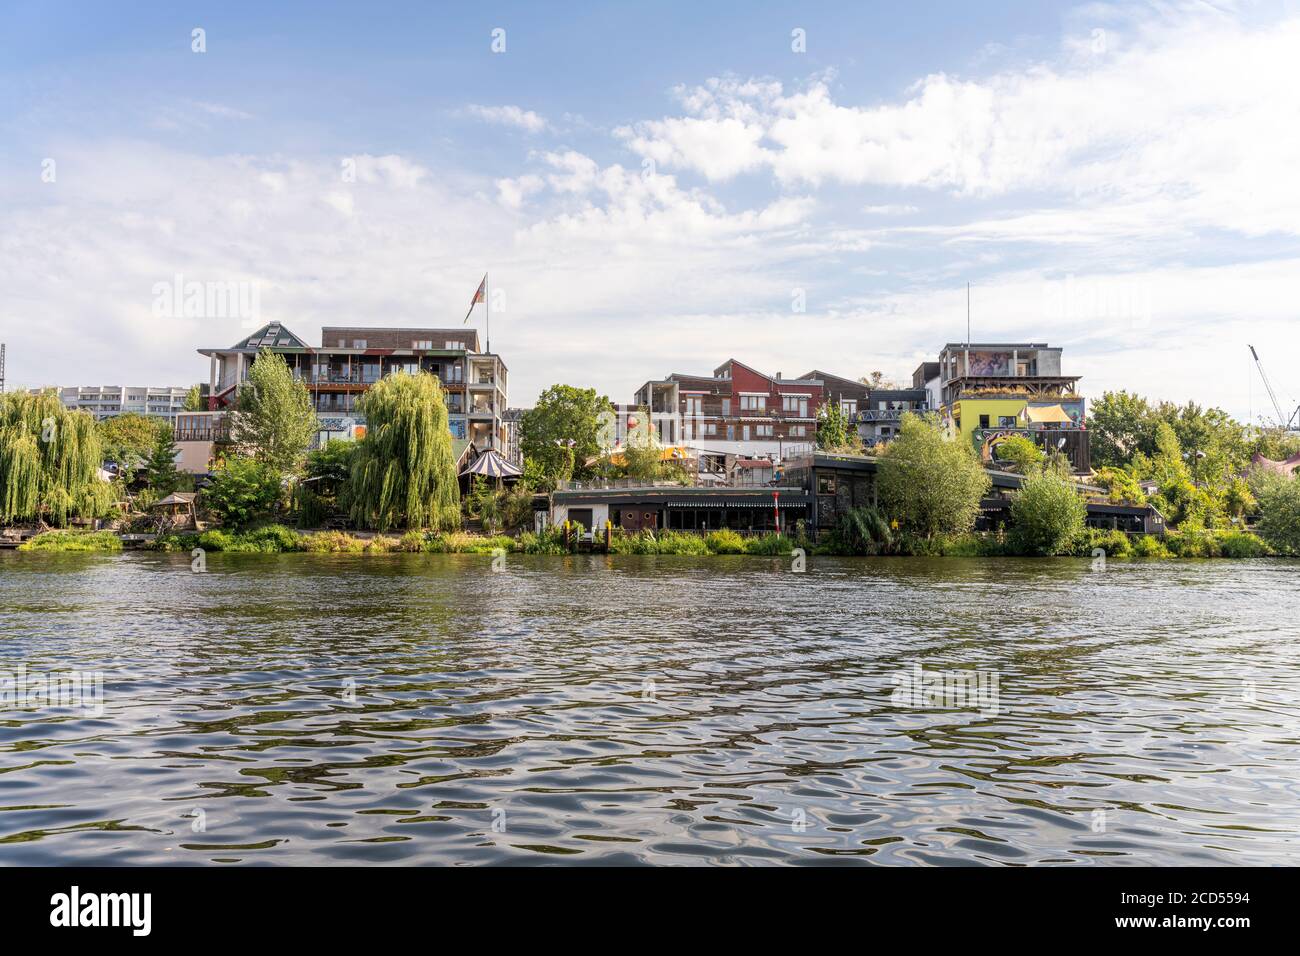 The Holzmarkt complex on the banks of the Spree river, a cultural venue and urban village for arts, events and entertainment, in Berlin, Germany Stock Photo